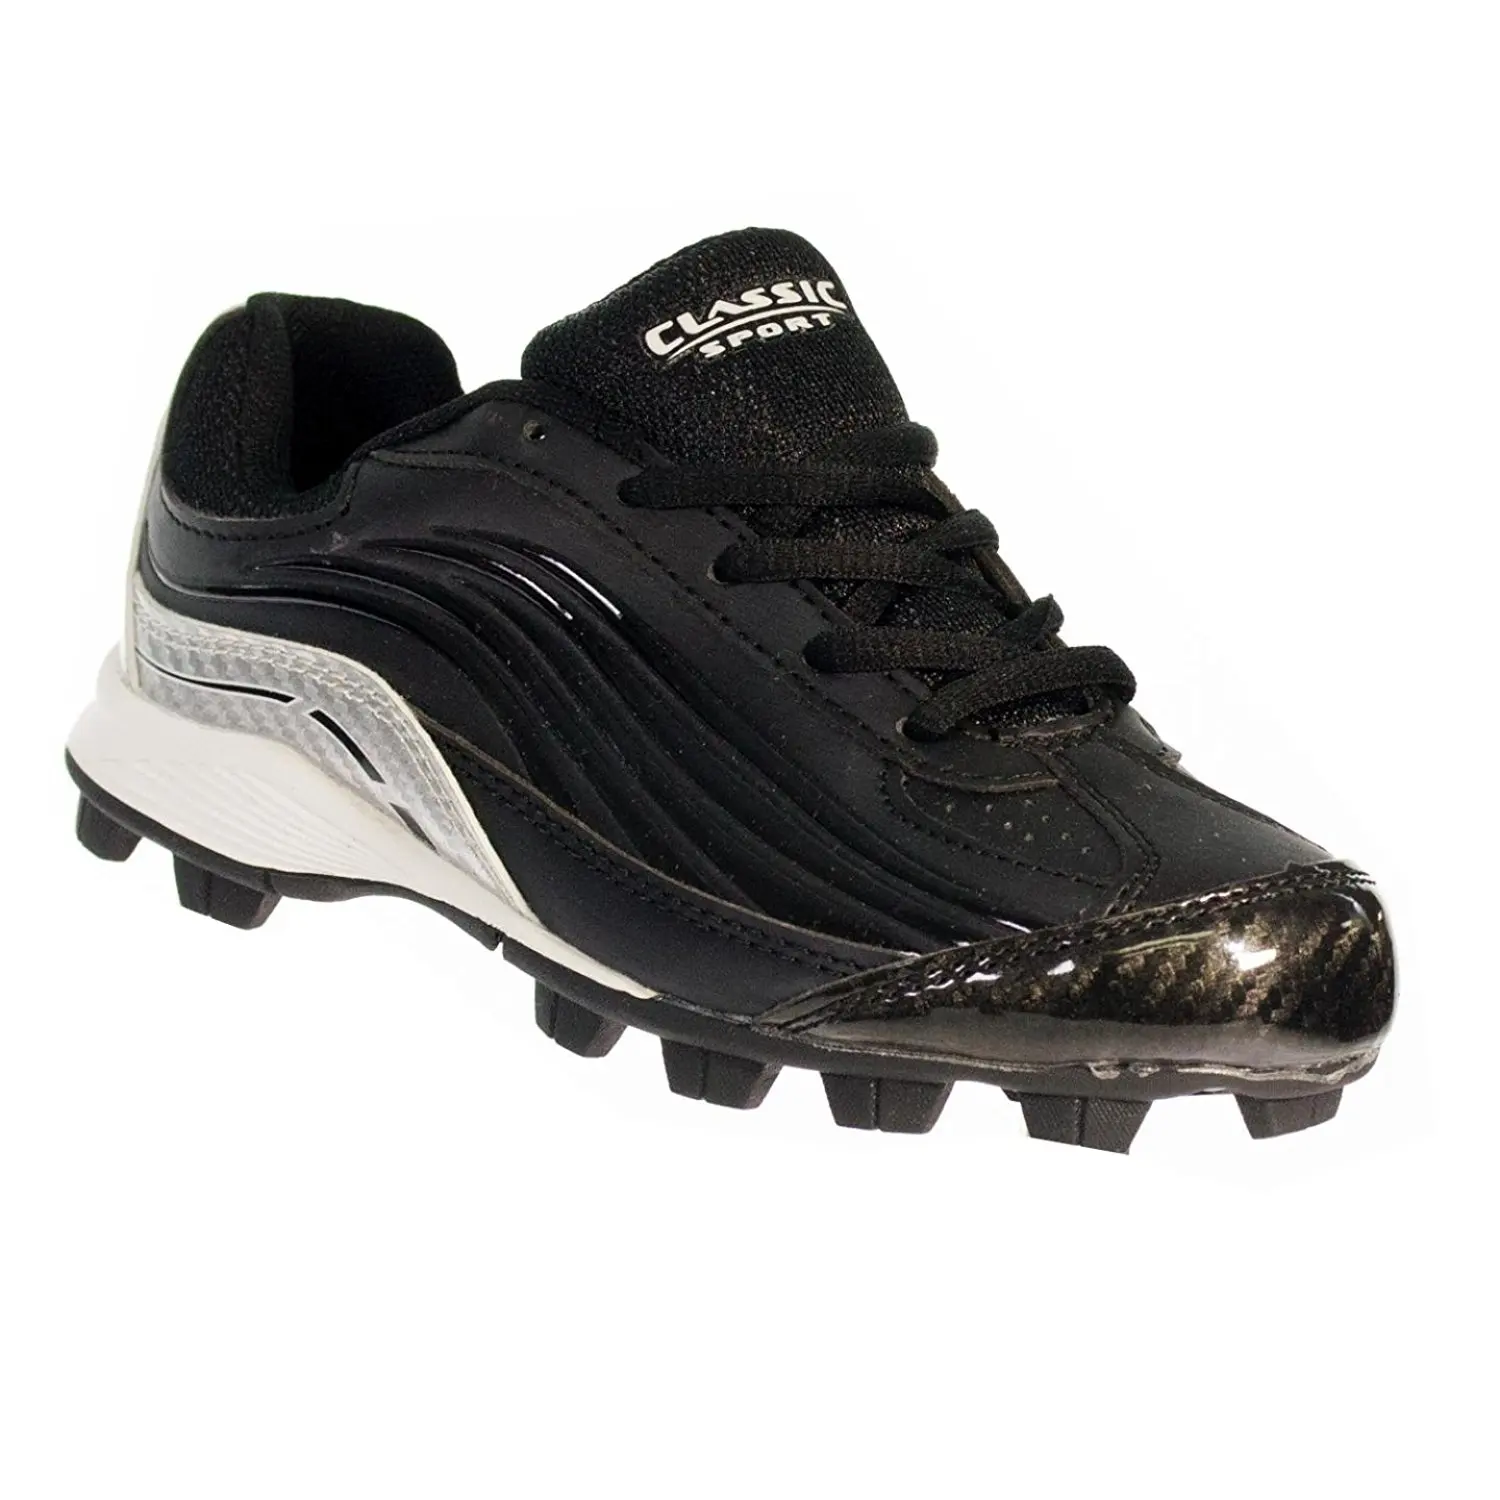 Cheap White Molded Baseball Cleats, find White Molded Baseball Cleats deals on line at Alibaba.com